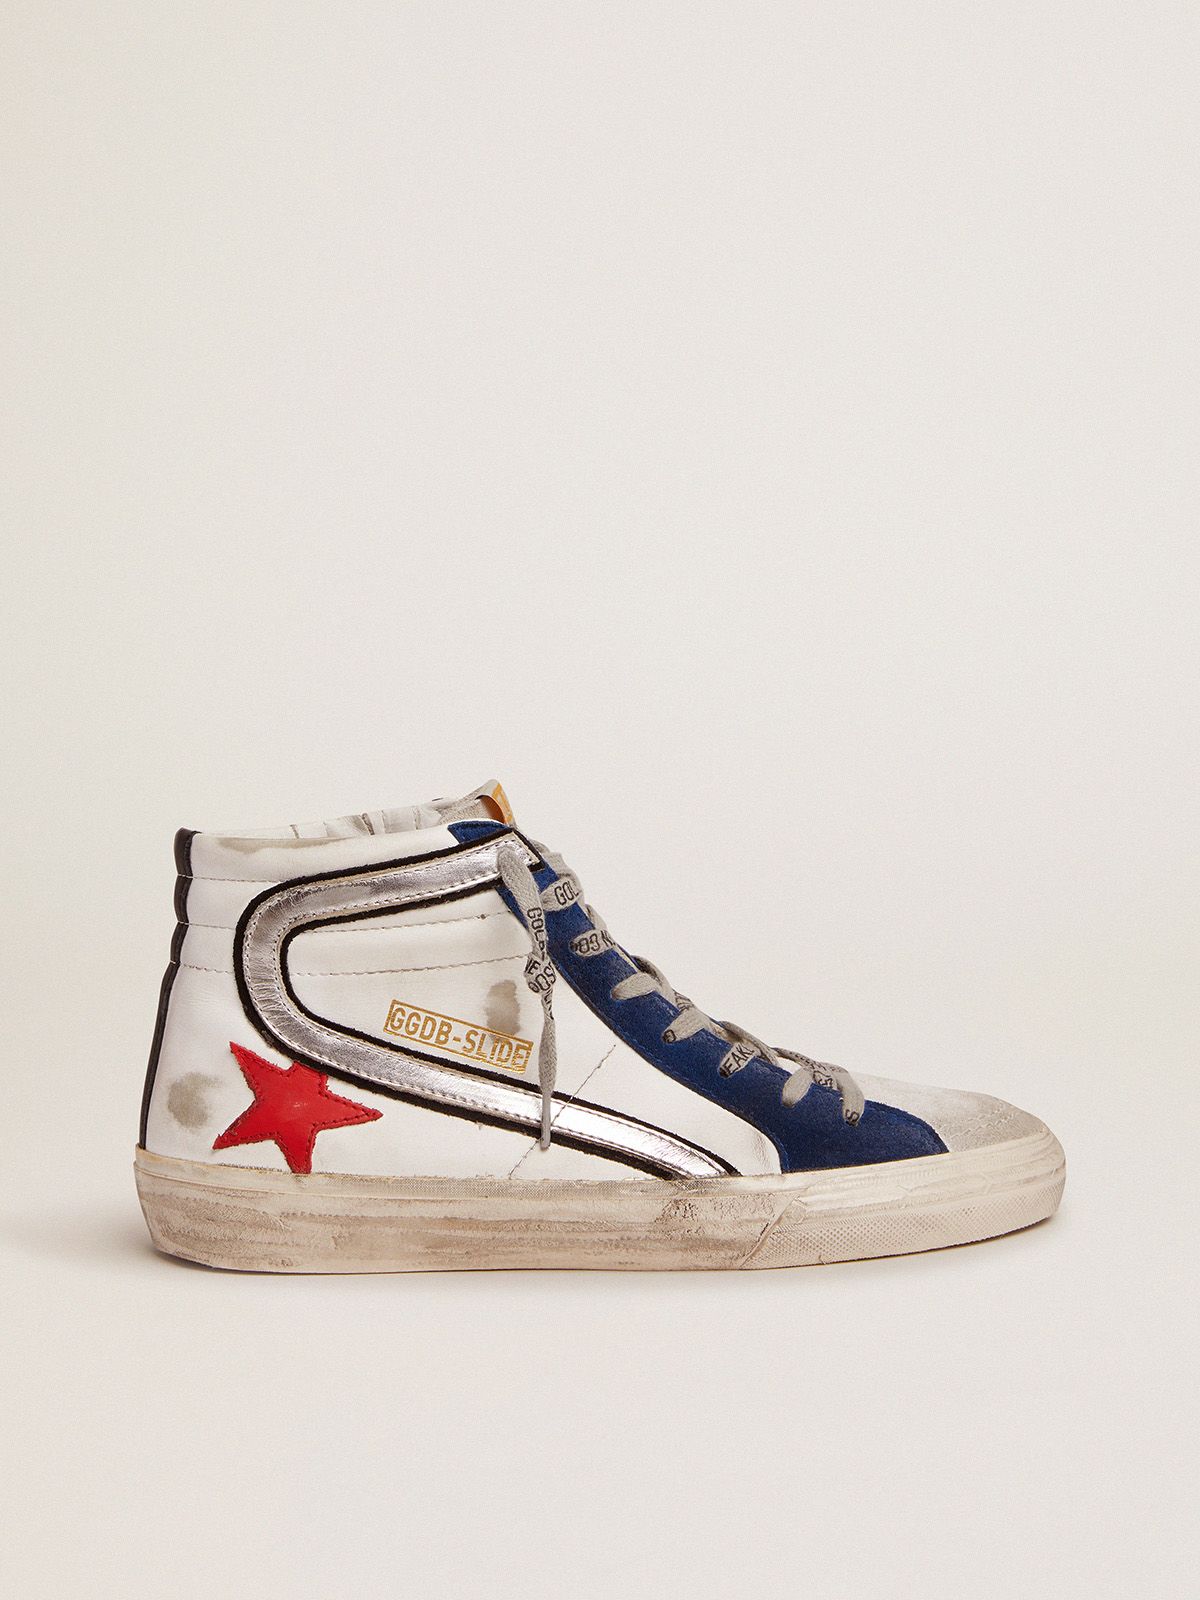 golden goose leather white sneakers in star red Slide with